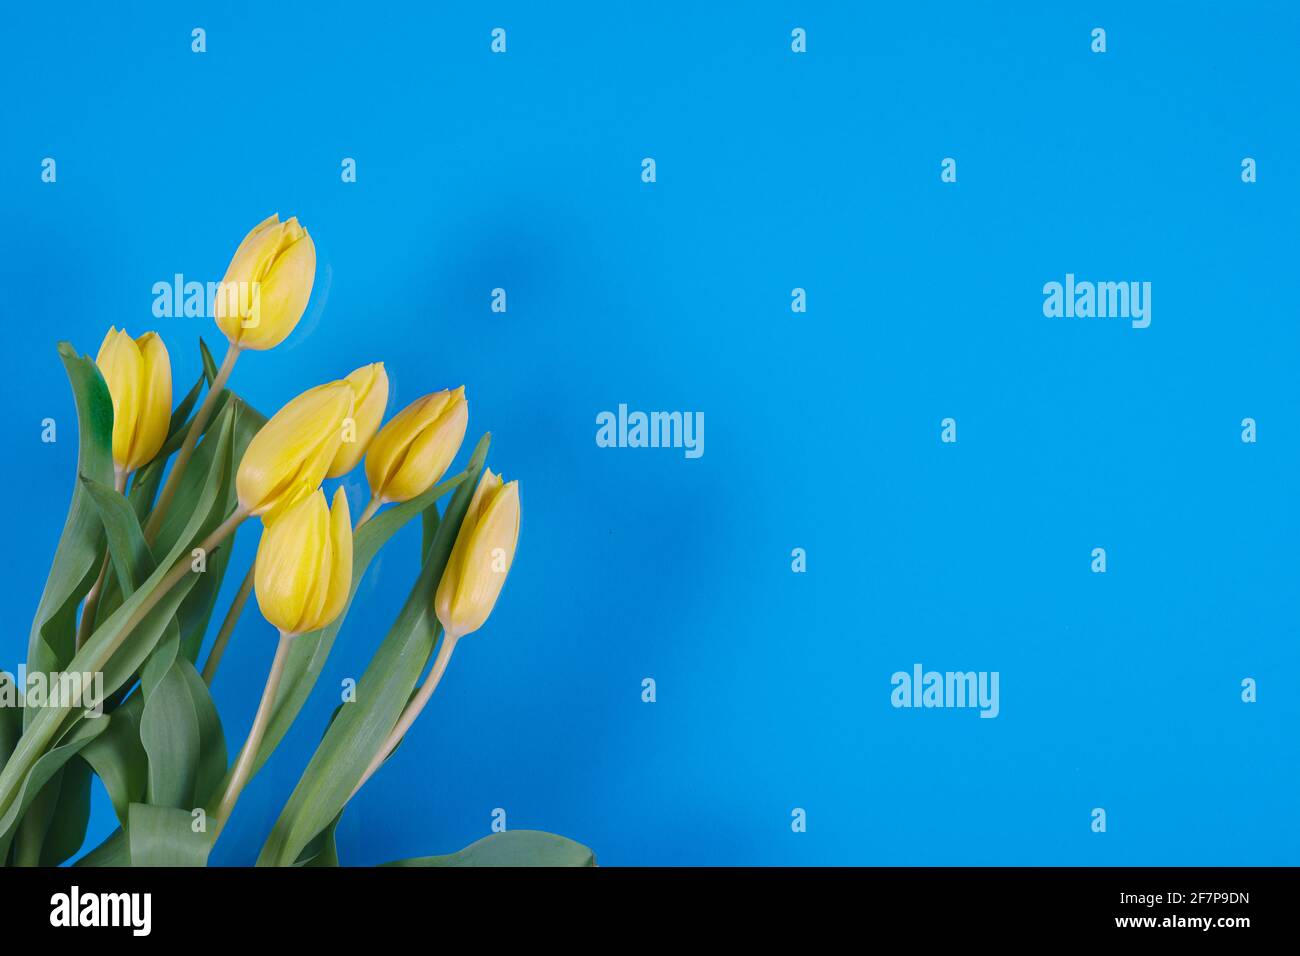 Tulips flowers on a color background High Quality Photo Stock Photo